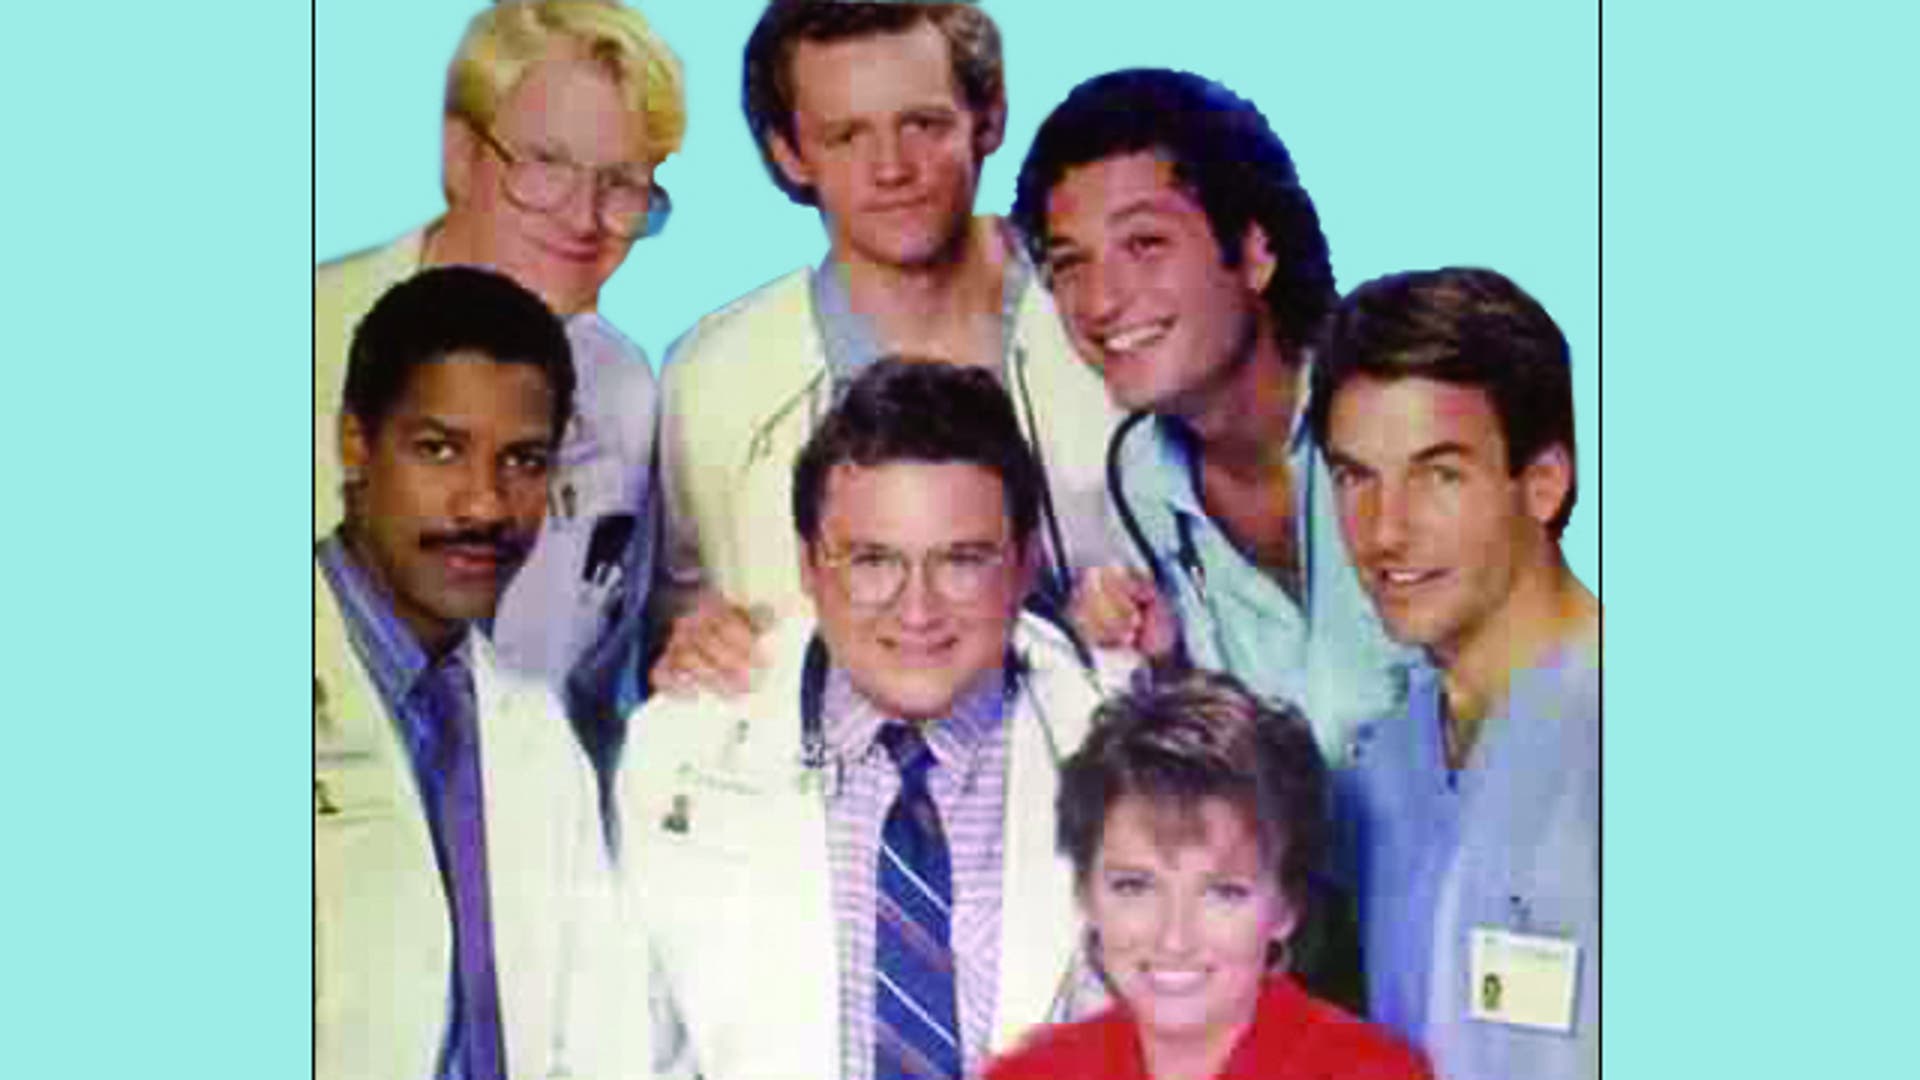 cast on st elsewhere